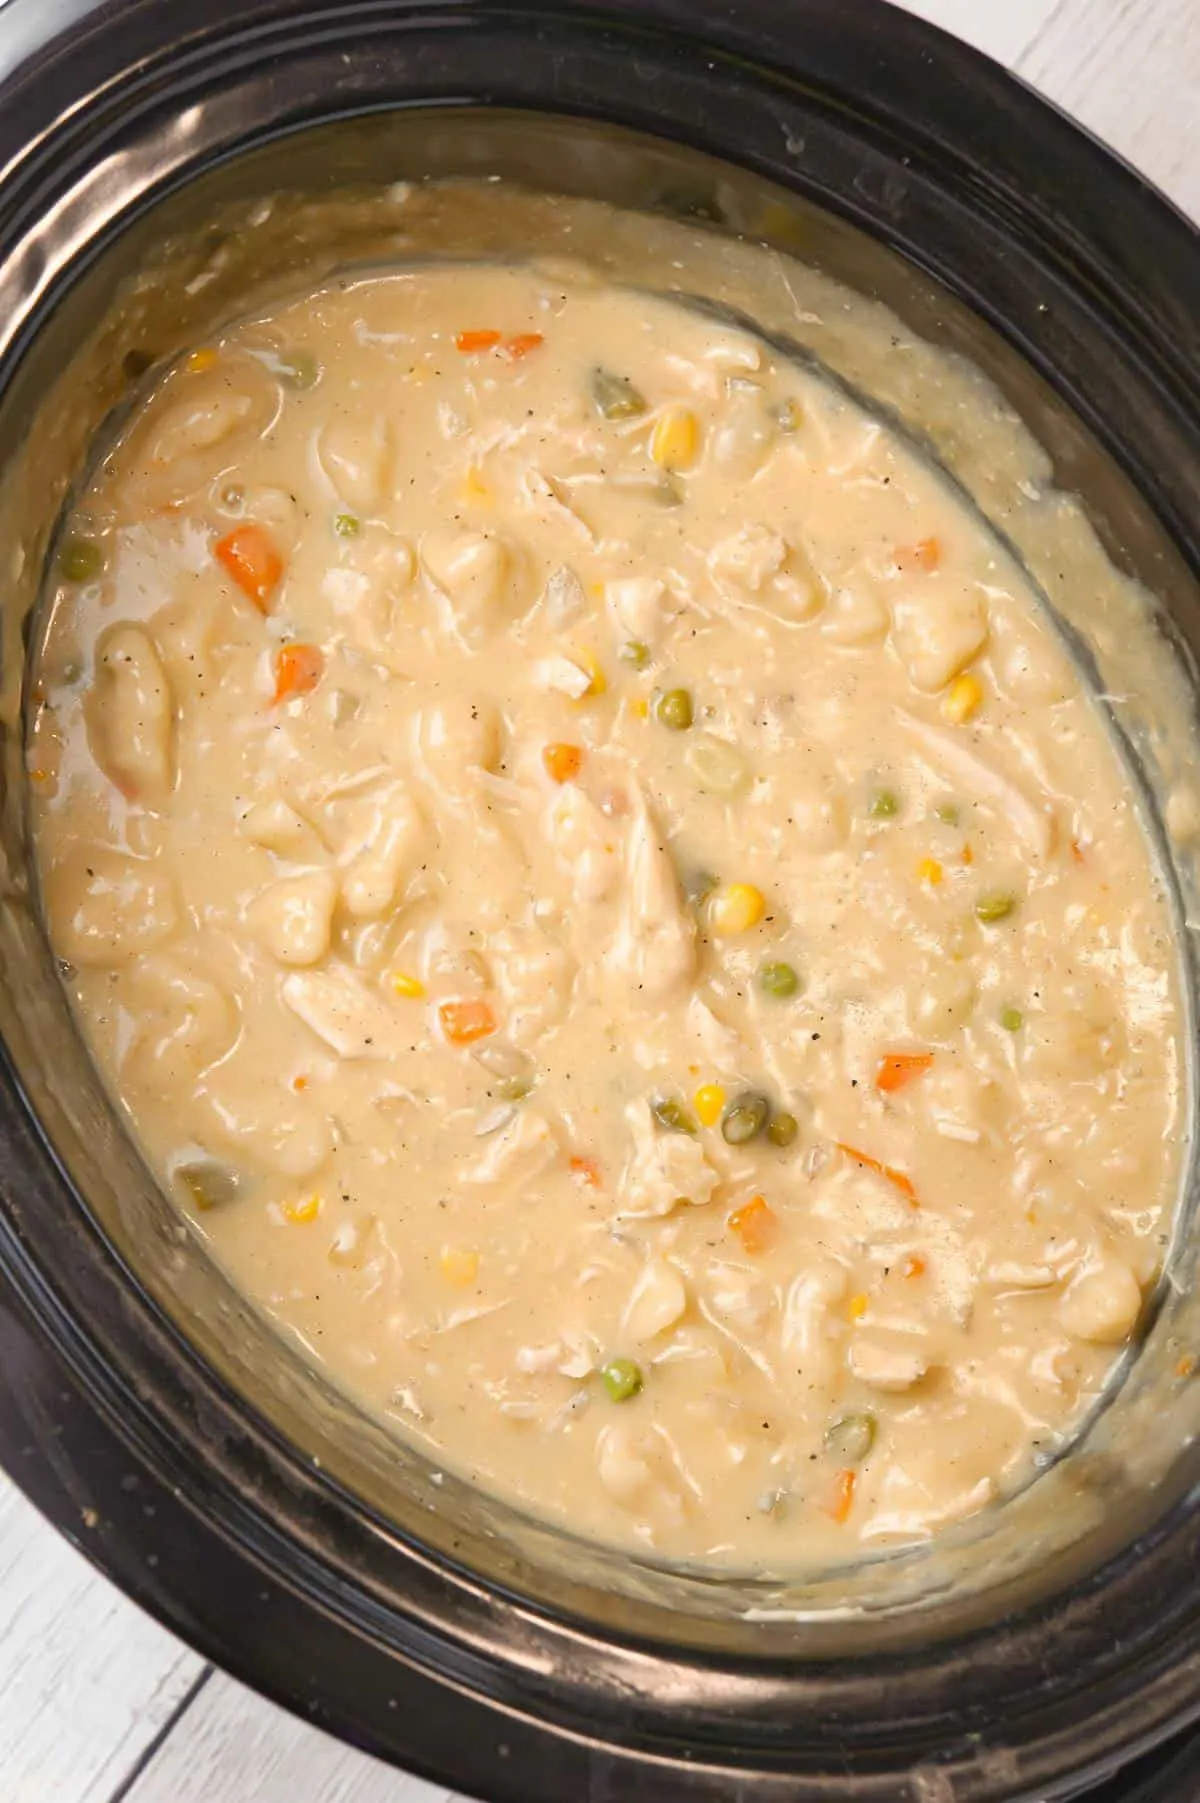 Crock Pot Chicken and Dumplings is an easy slow cooker dinner recipe loaded with chicken breast, veggies and Pillsbury biscuit dough dumplings all in a creamy sauce.